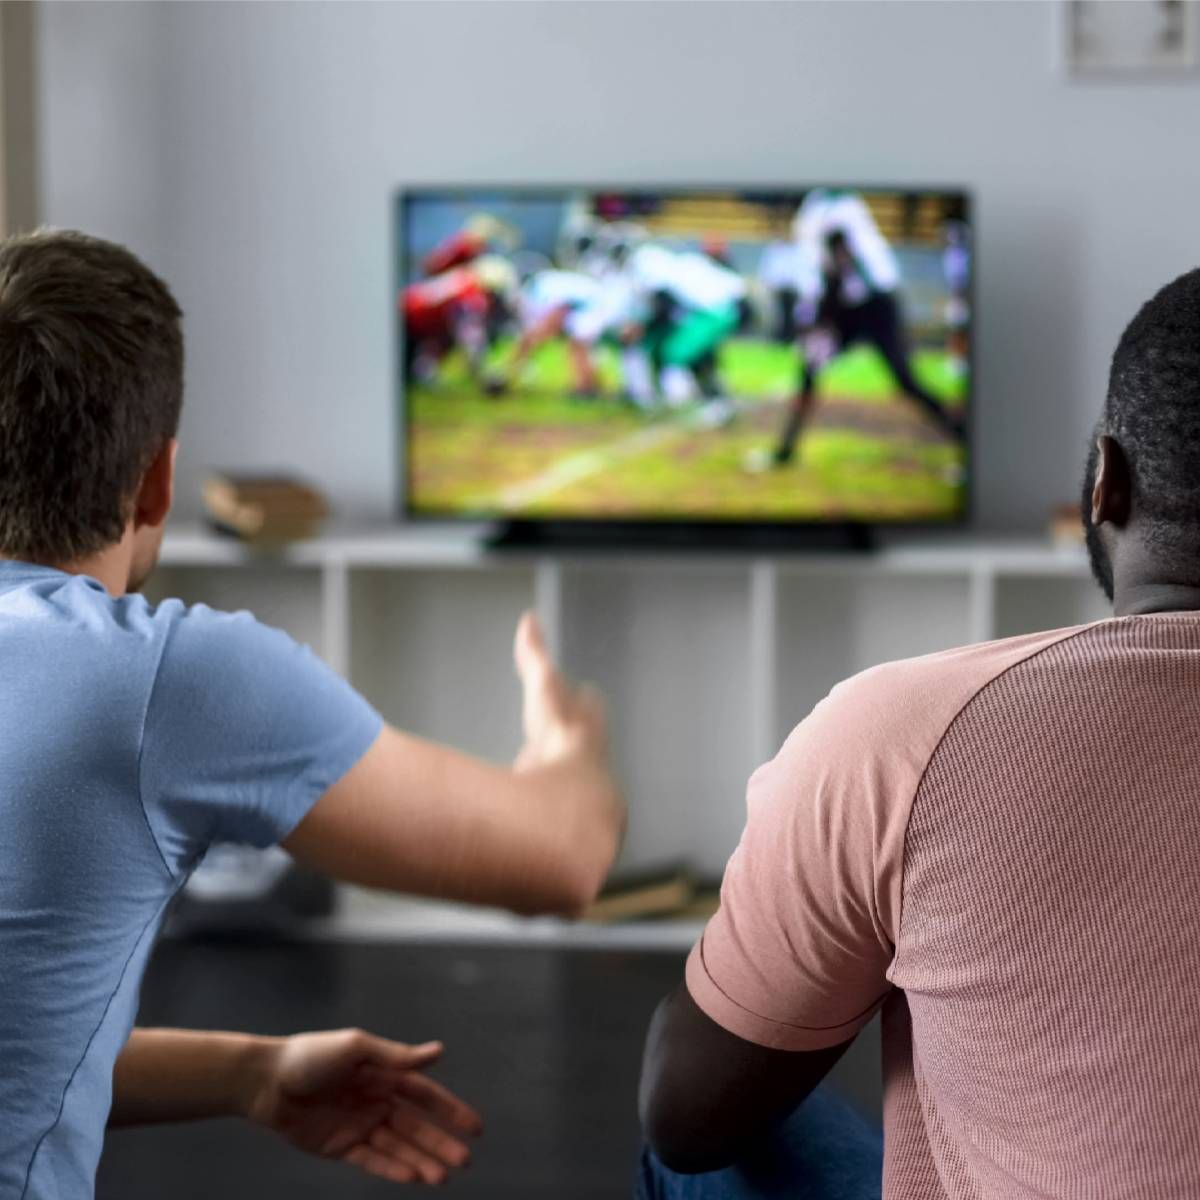 Friends gathered on a couch watching an American football game from their living room television.